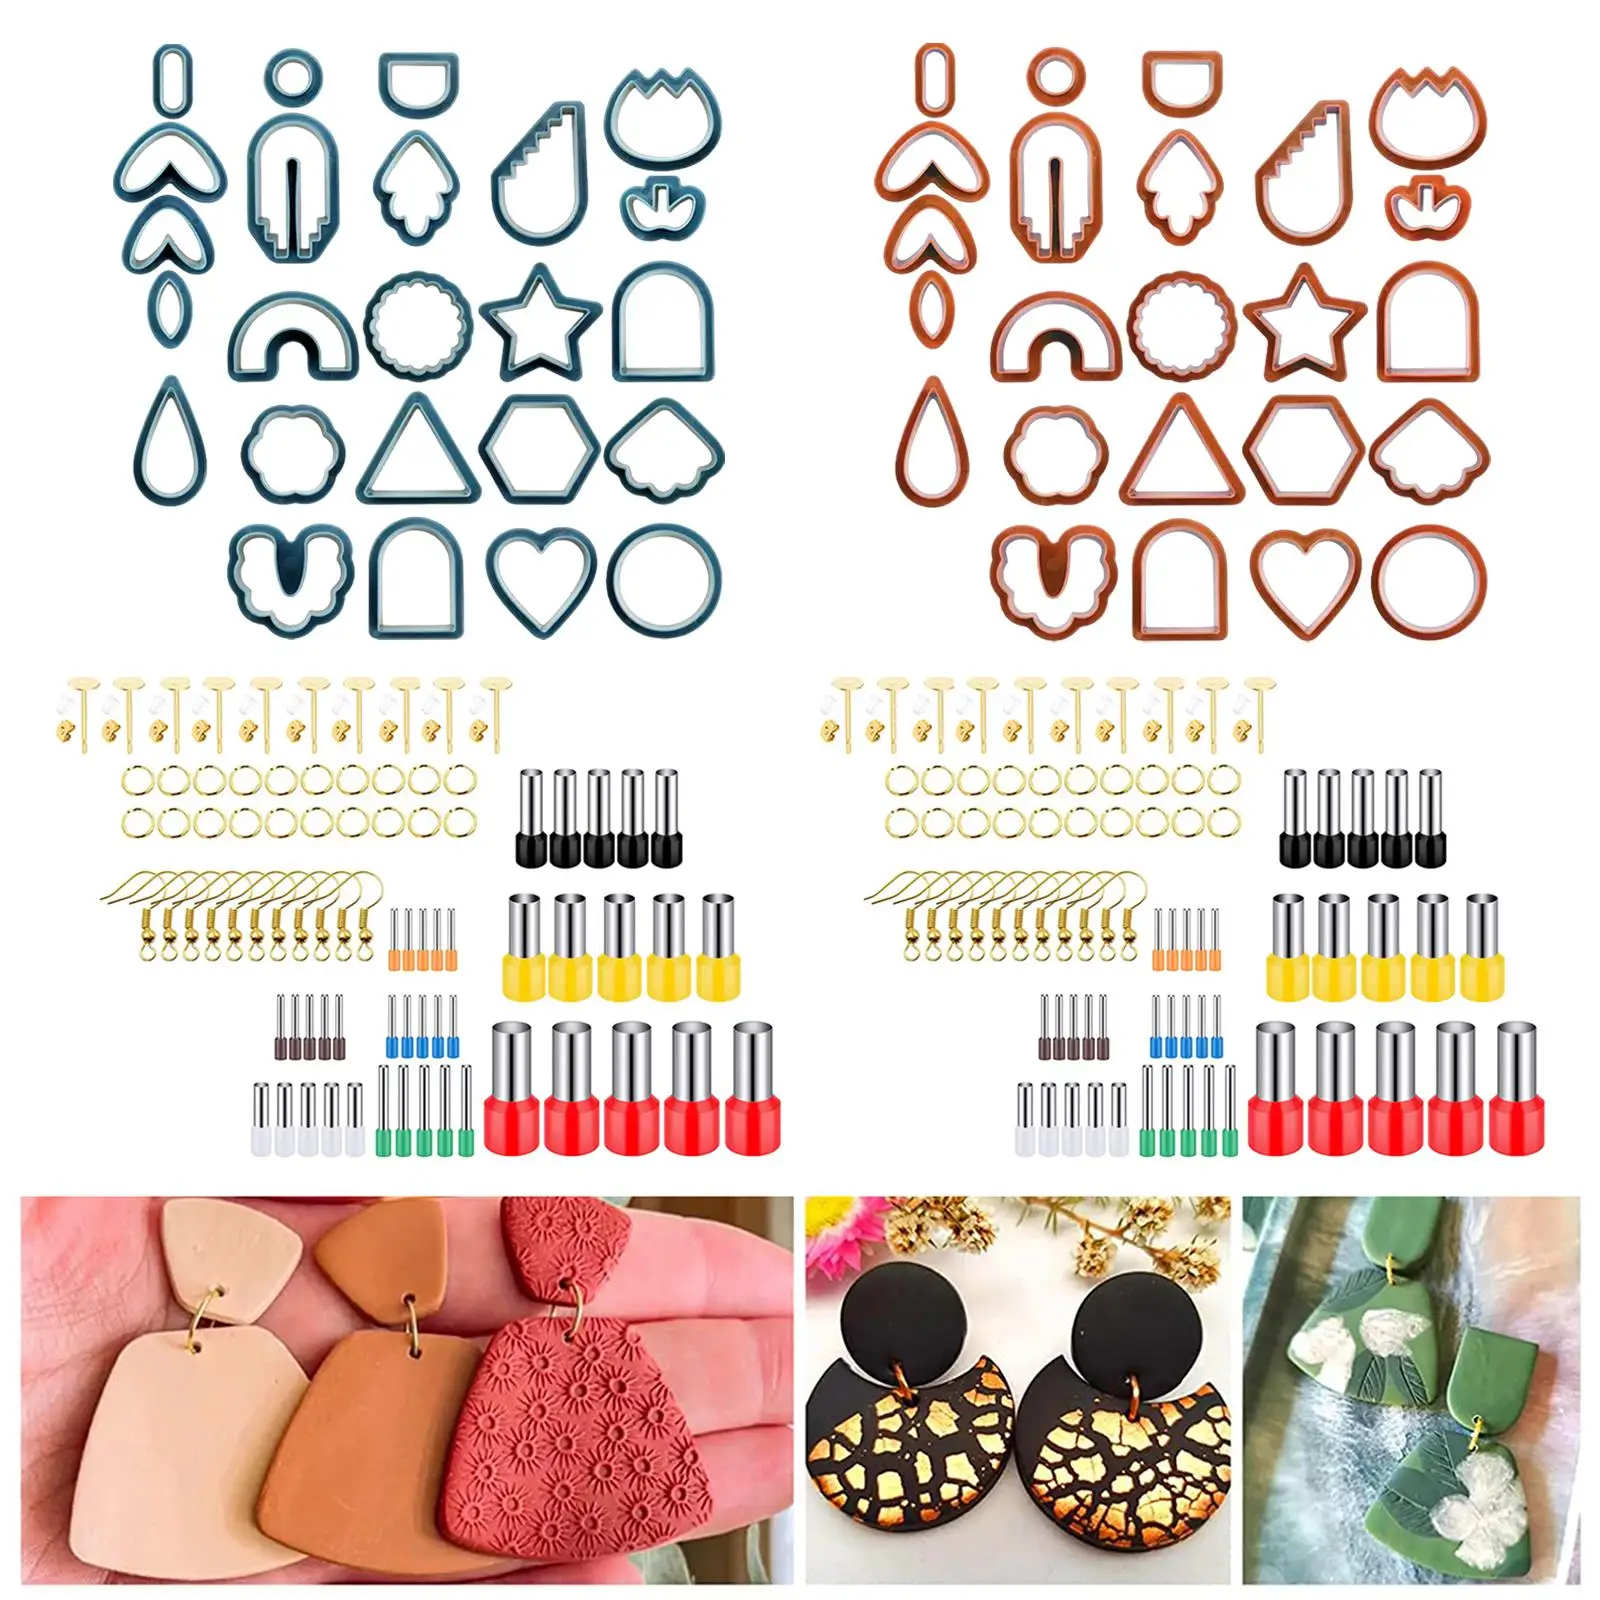 114 Pieces Polymer Art Different Shapes Earring Cutter DIY Earrings Ceramic Craft Jewelry Pendant Making